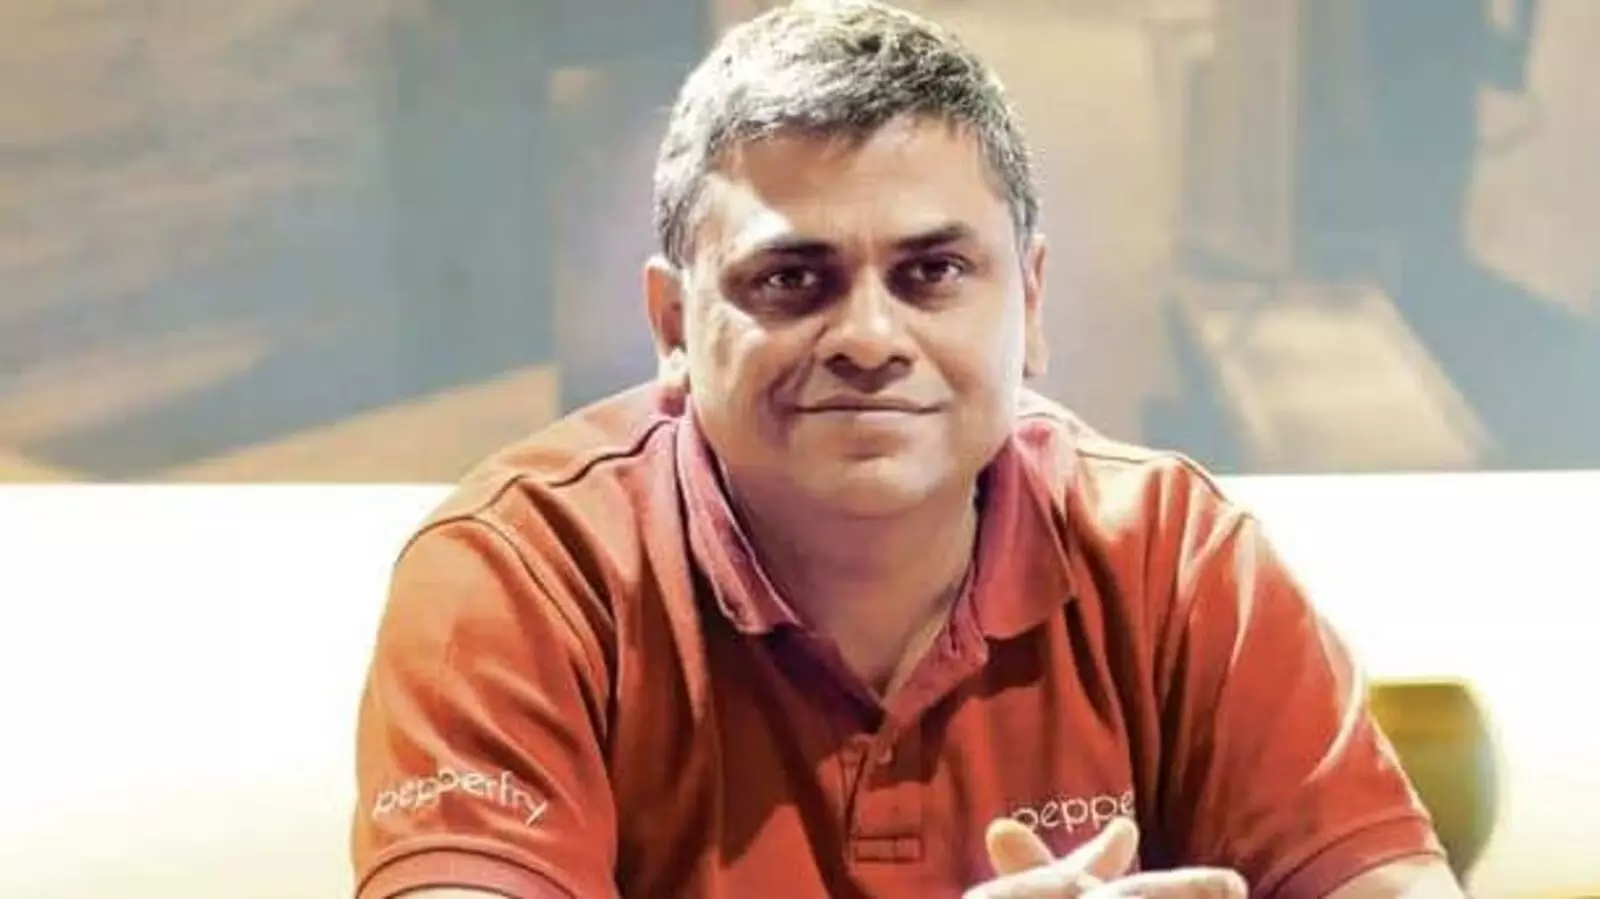 Pepperfry’s CEO Ambareesh Murty no more, dies due to heart attack